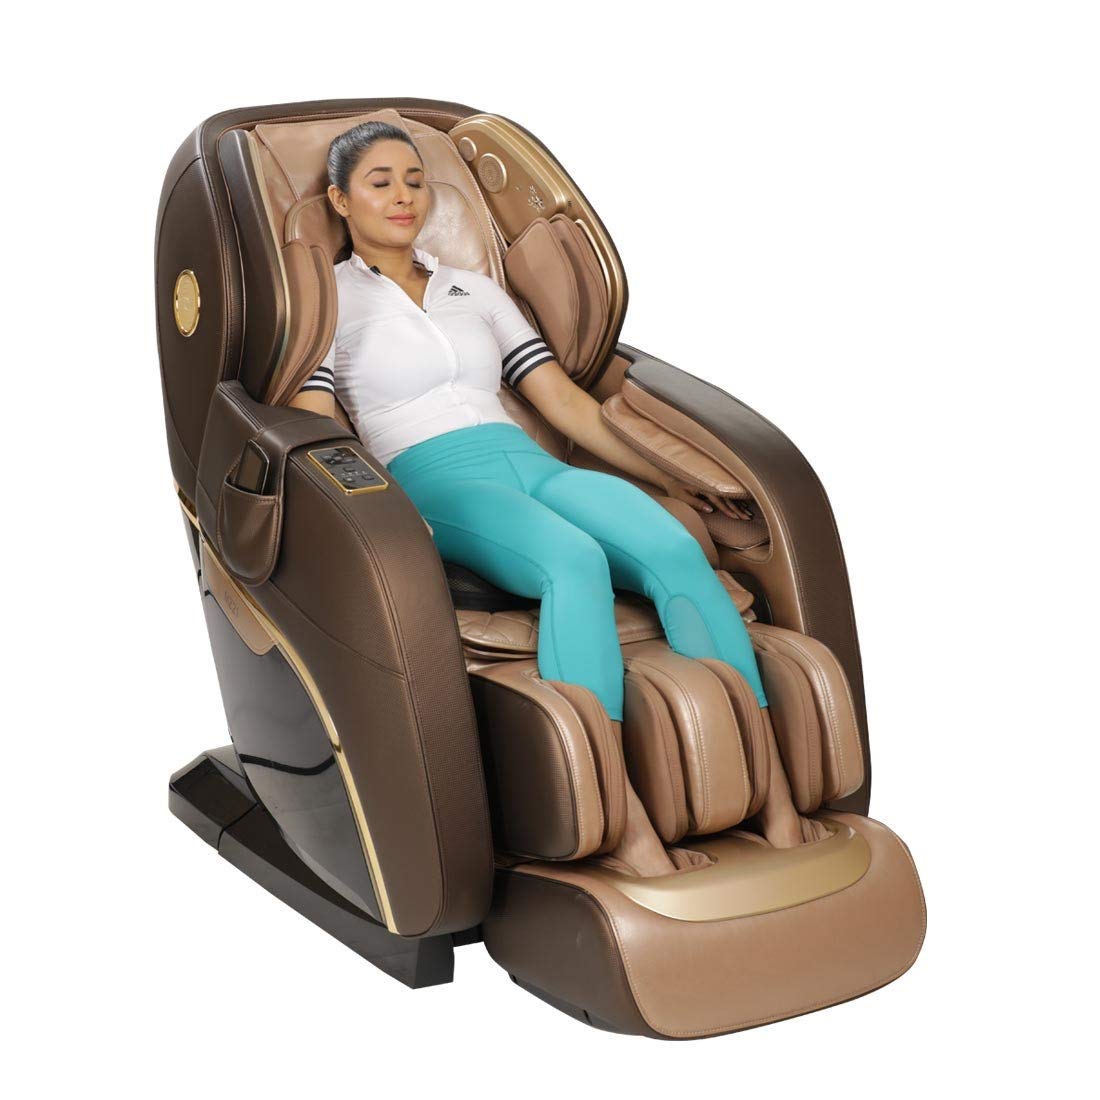 JSB MZ21 4D Massage Chair Zero Gravity For Home Stress Relief With Soft Rollers Music Bluetooth Chair 